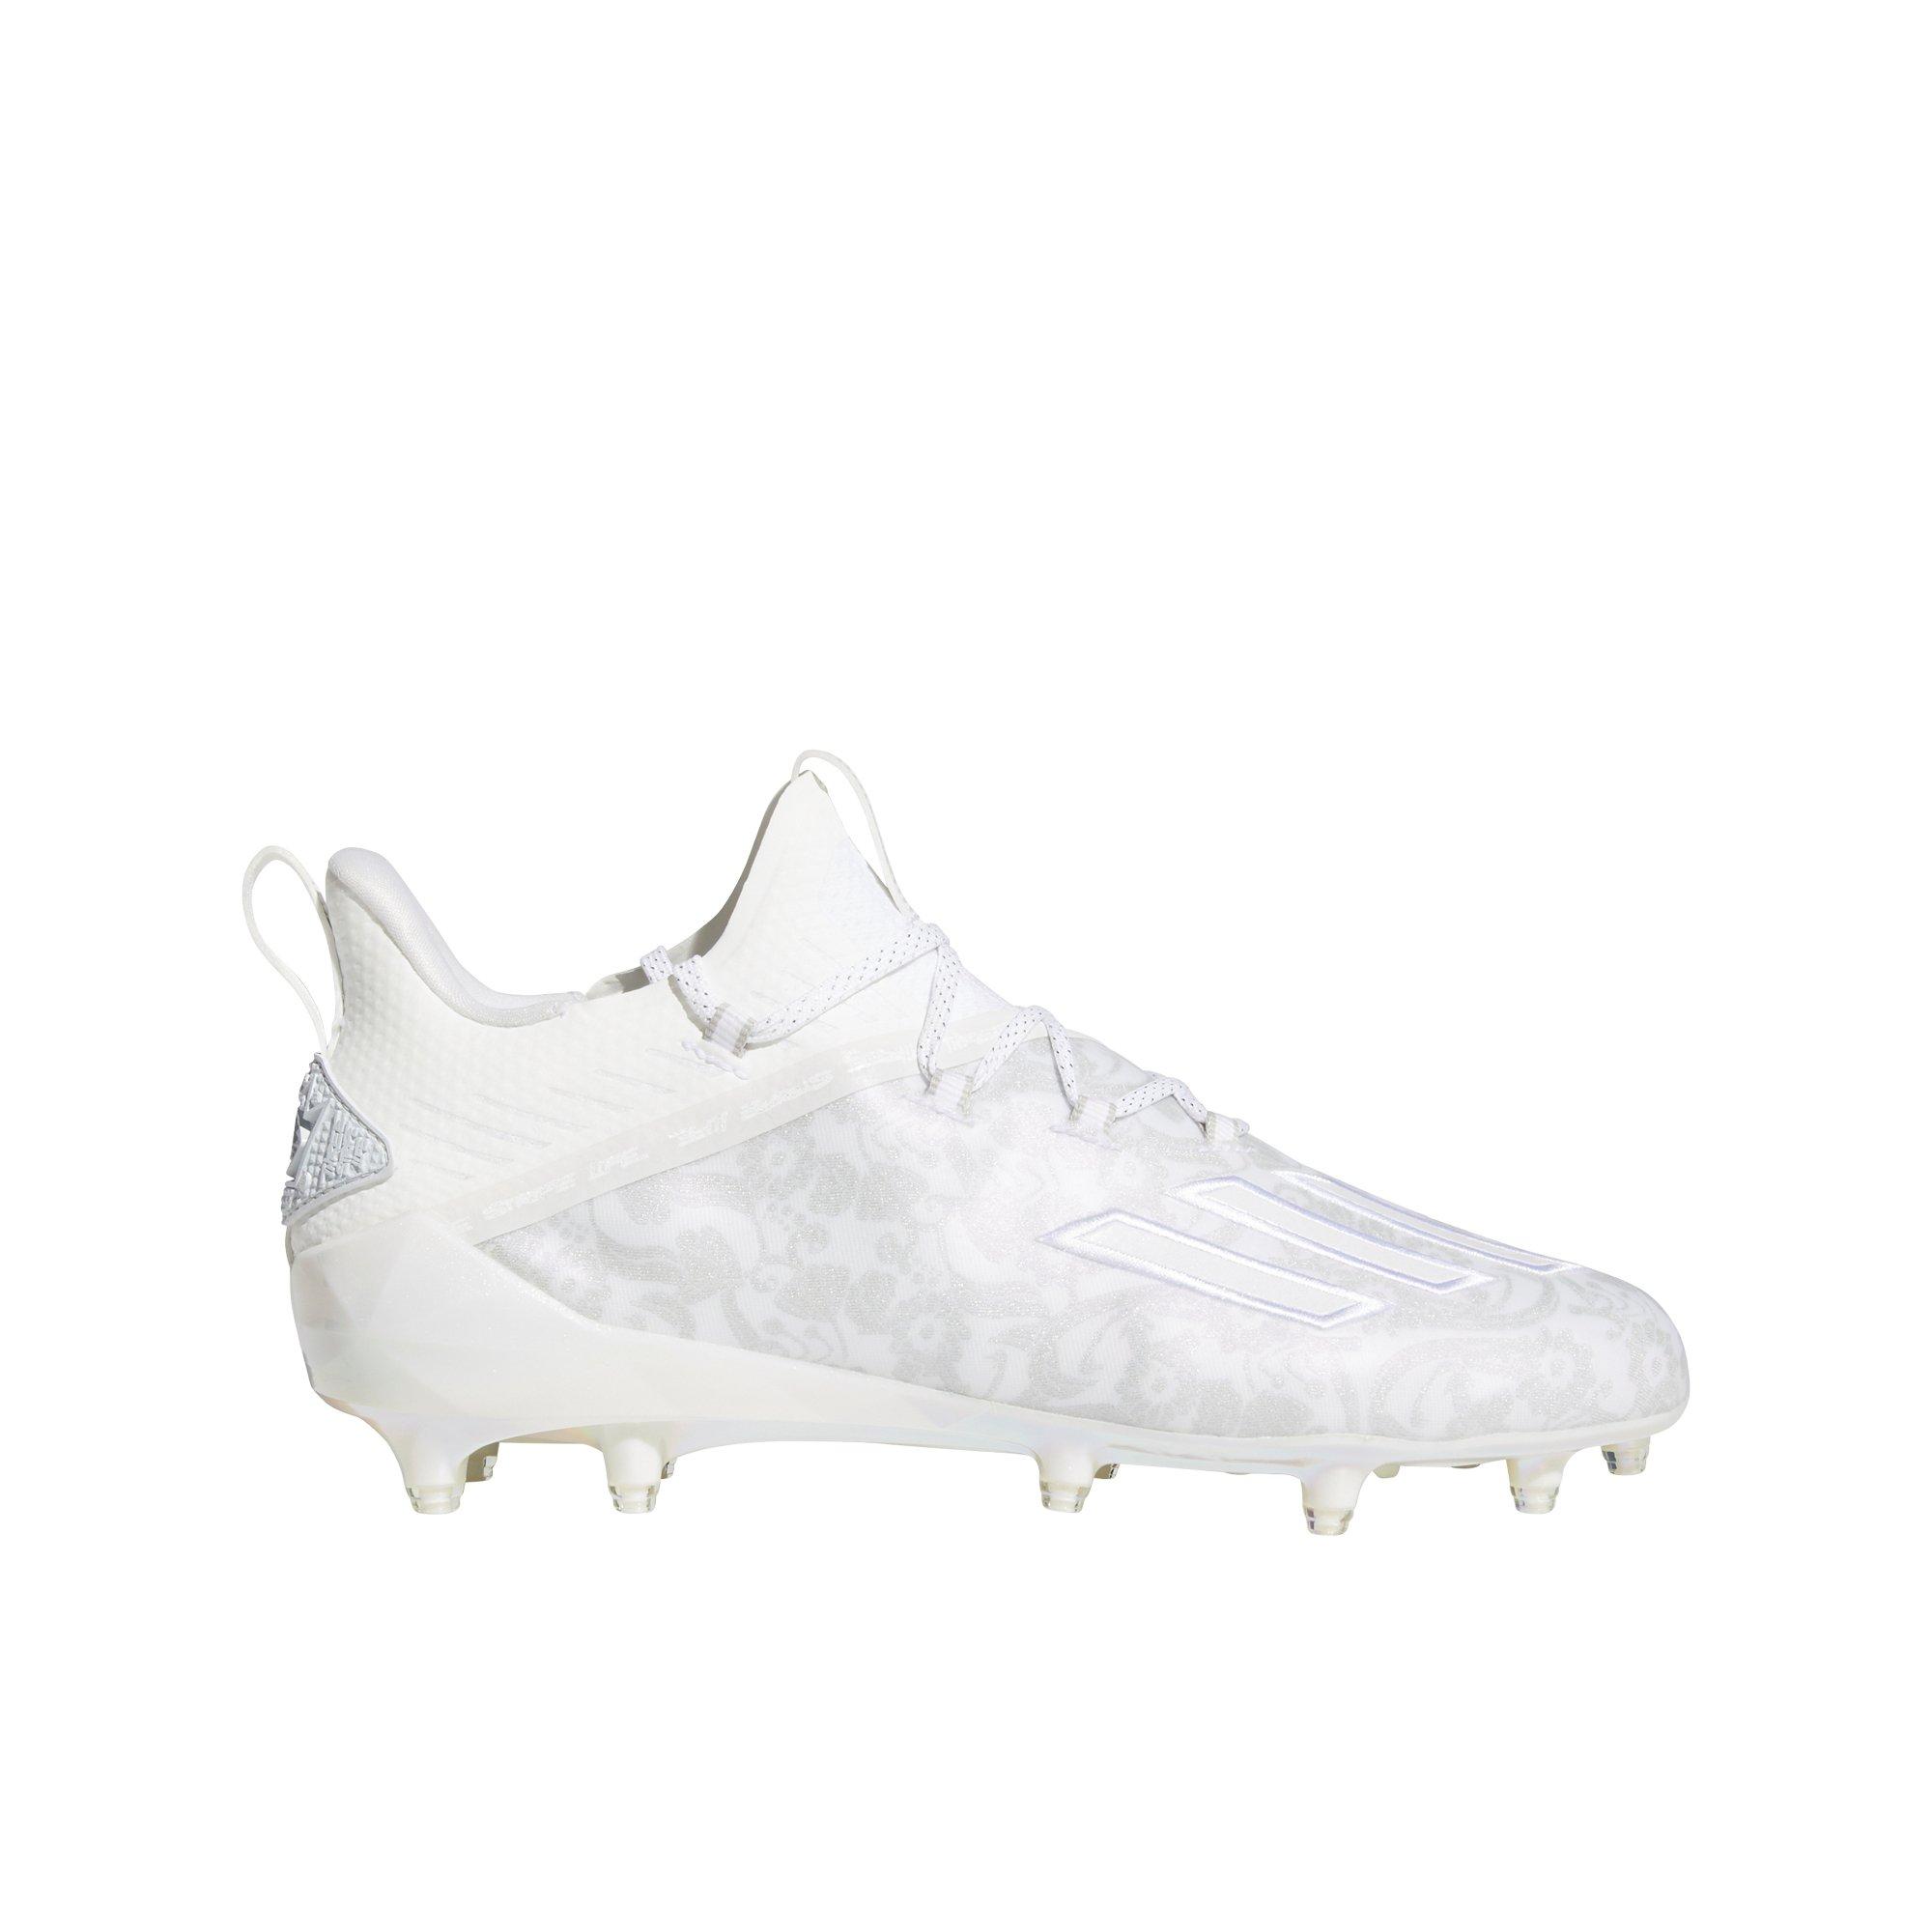 adizero young king cleats